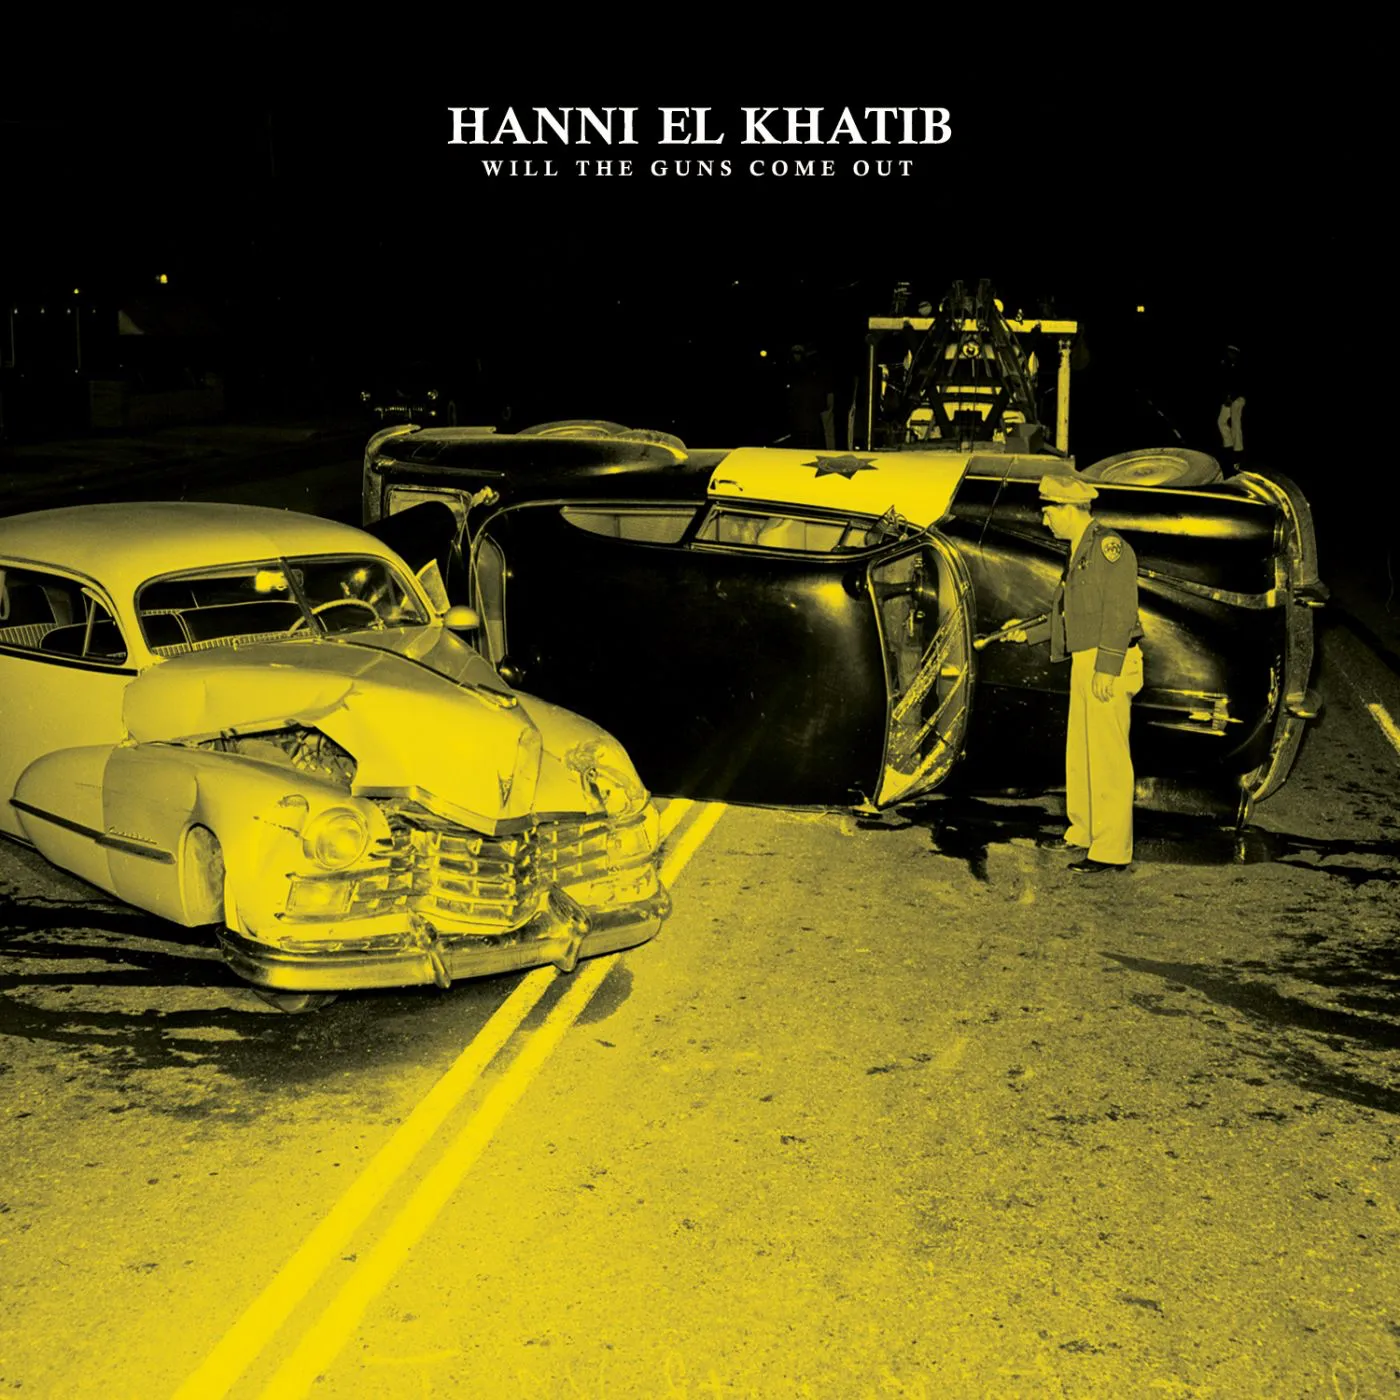 <strong>Hanni El Khatib - Will The Guns Come Out.</strong> (Cd)